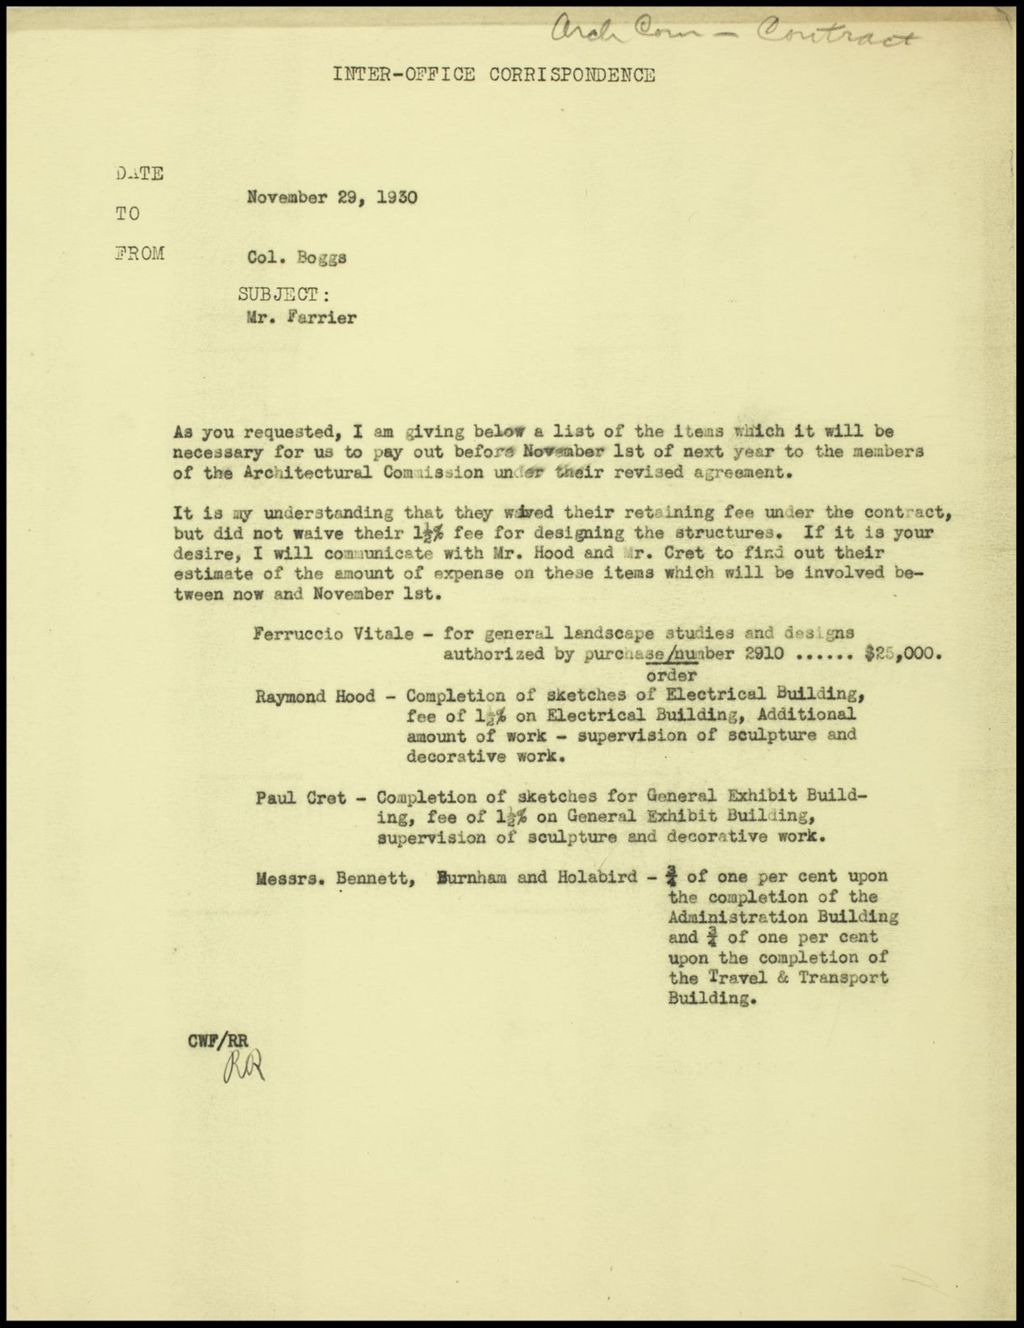 Architectural Committee - contracts, 1930 (Folder 5-16)